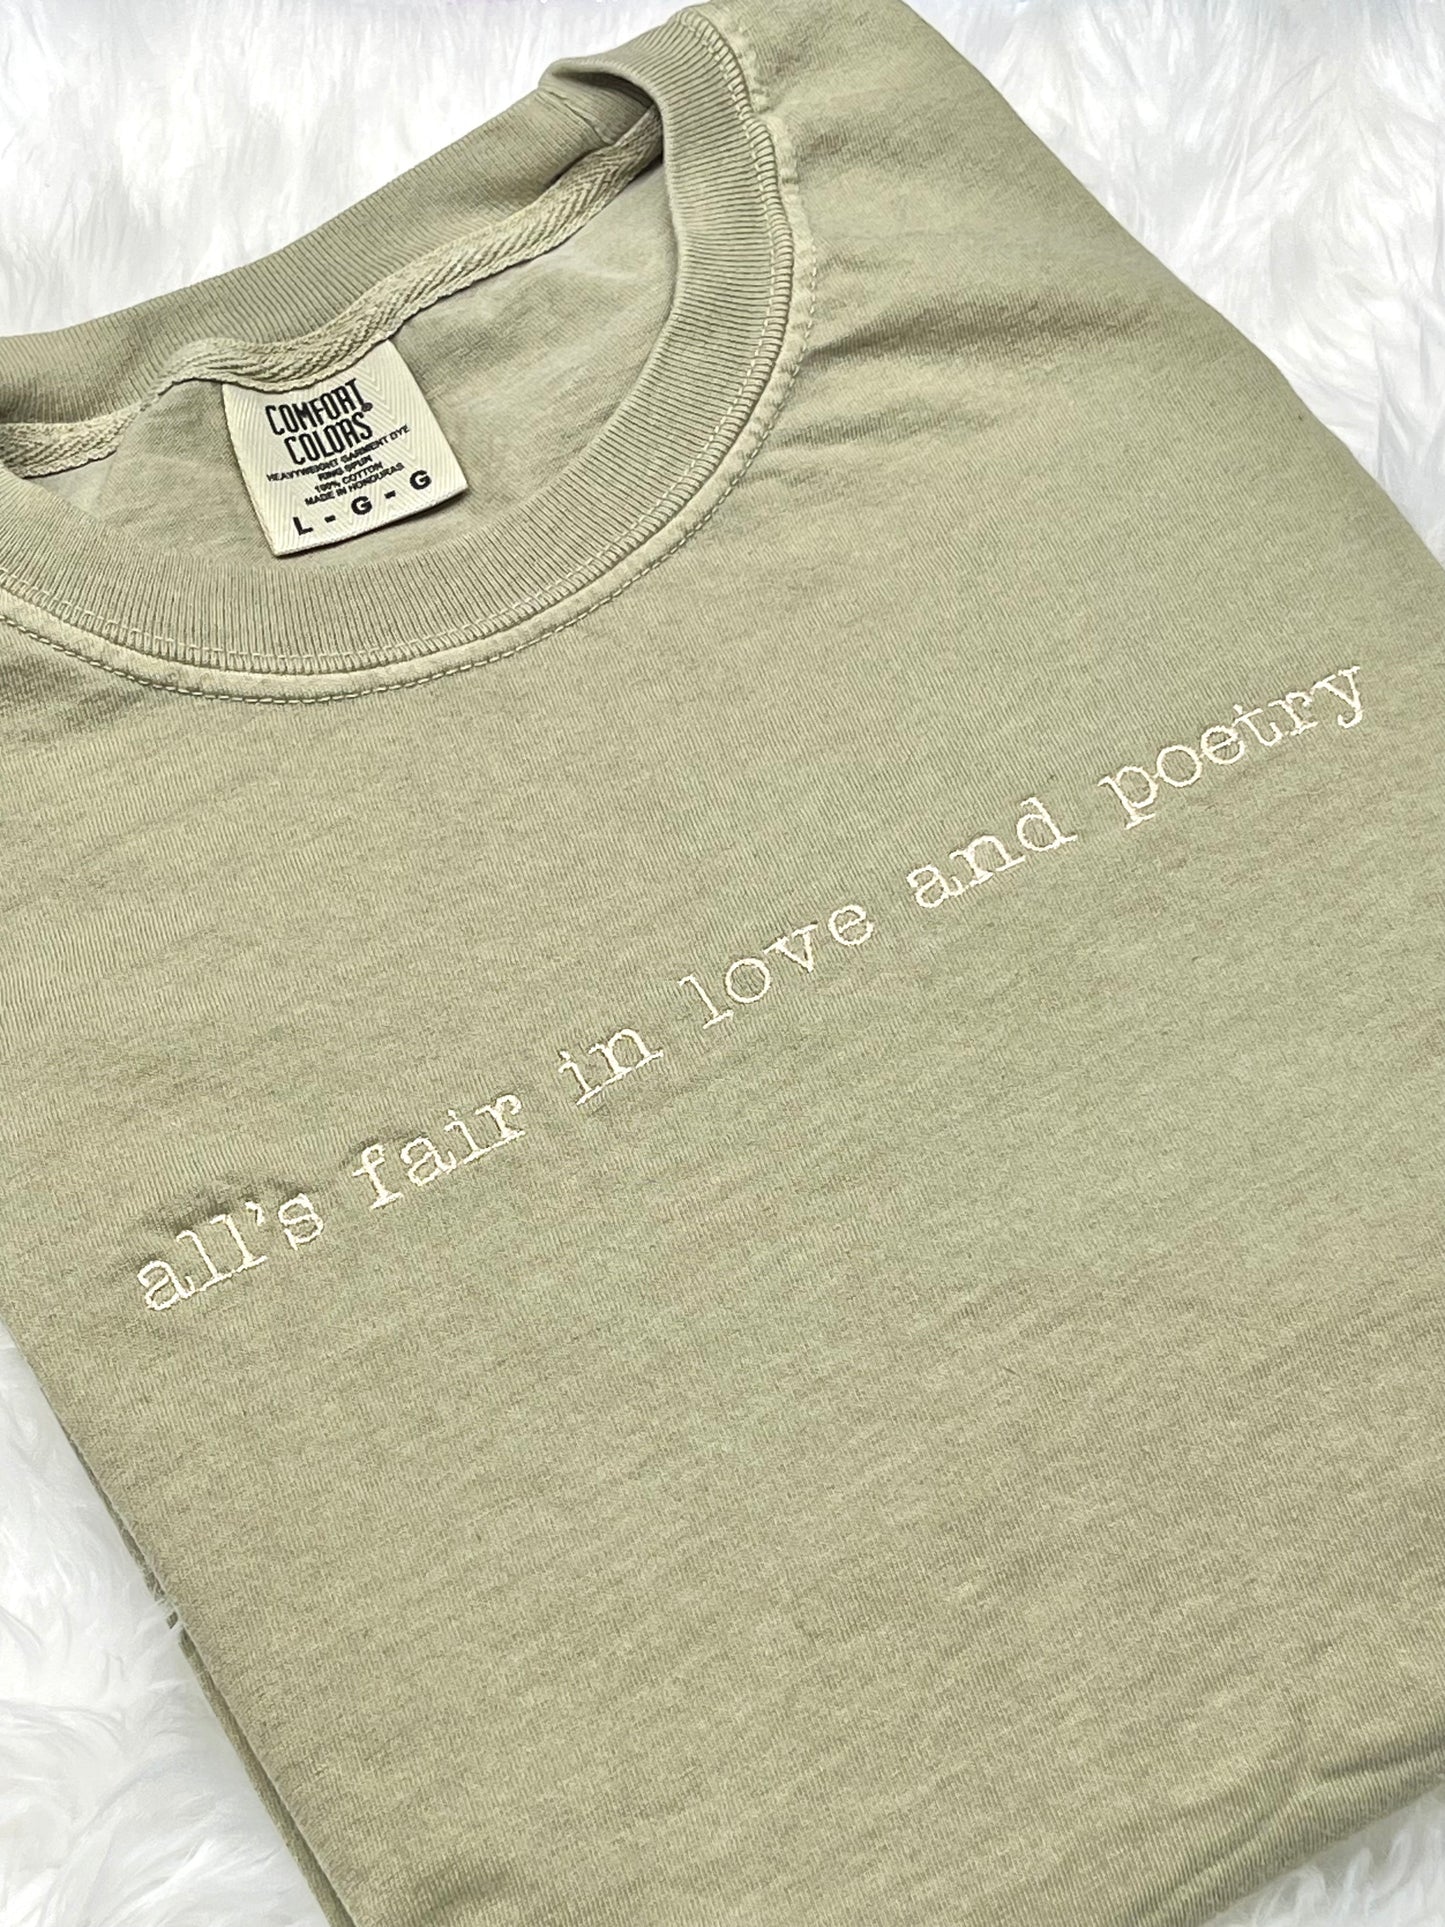 All's Fair In Love TS Inspired Shirt Glass Can